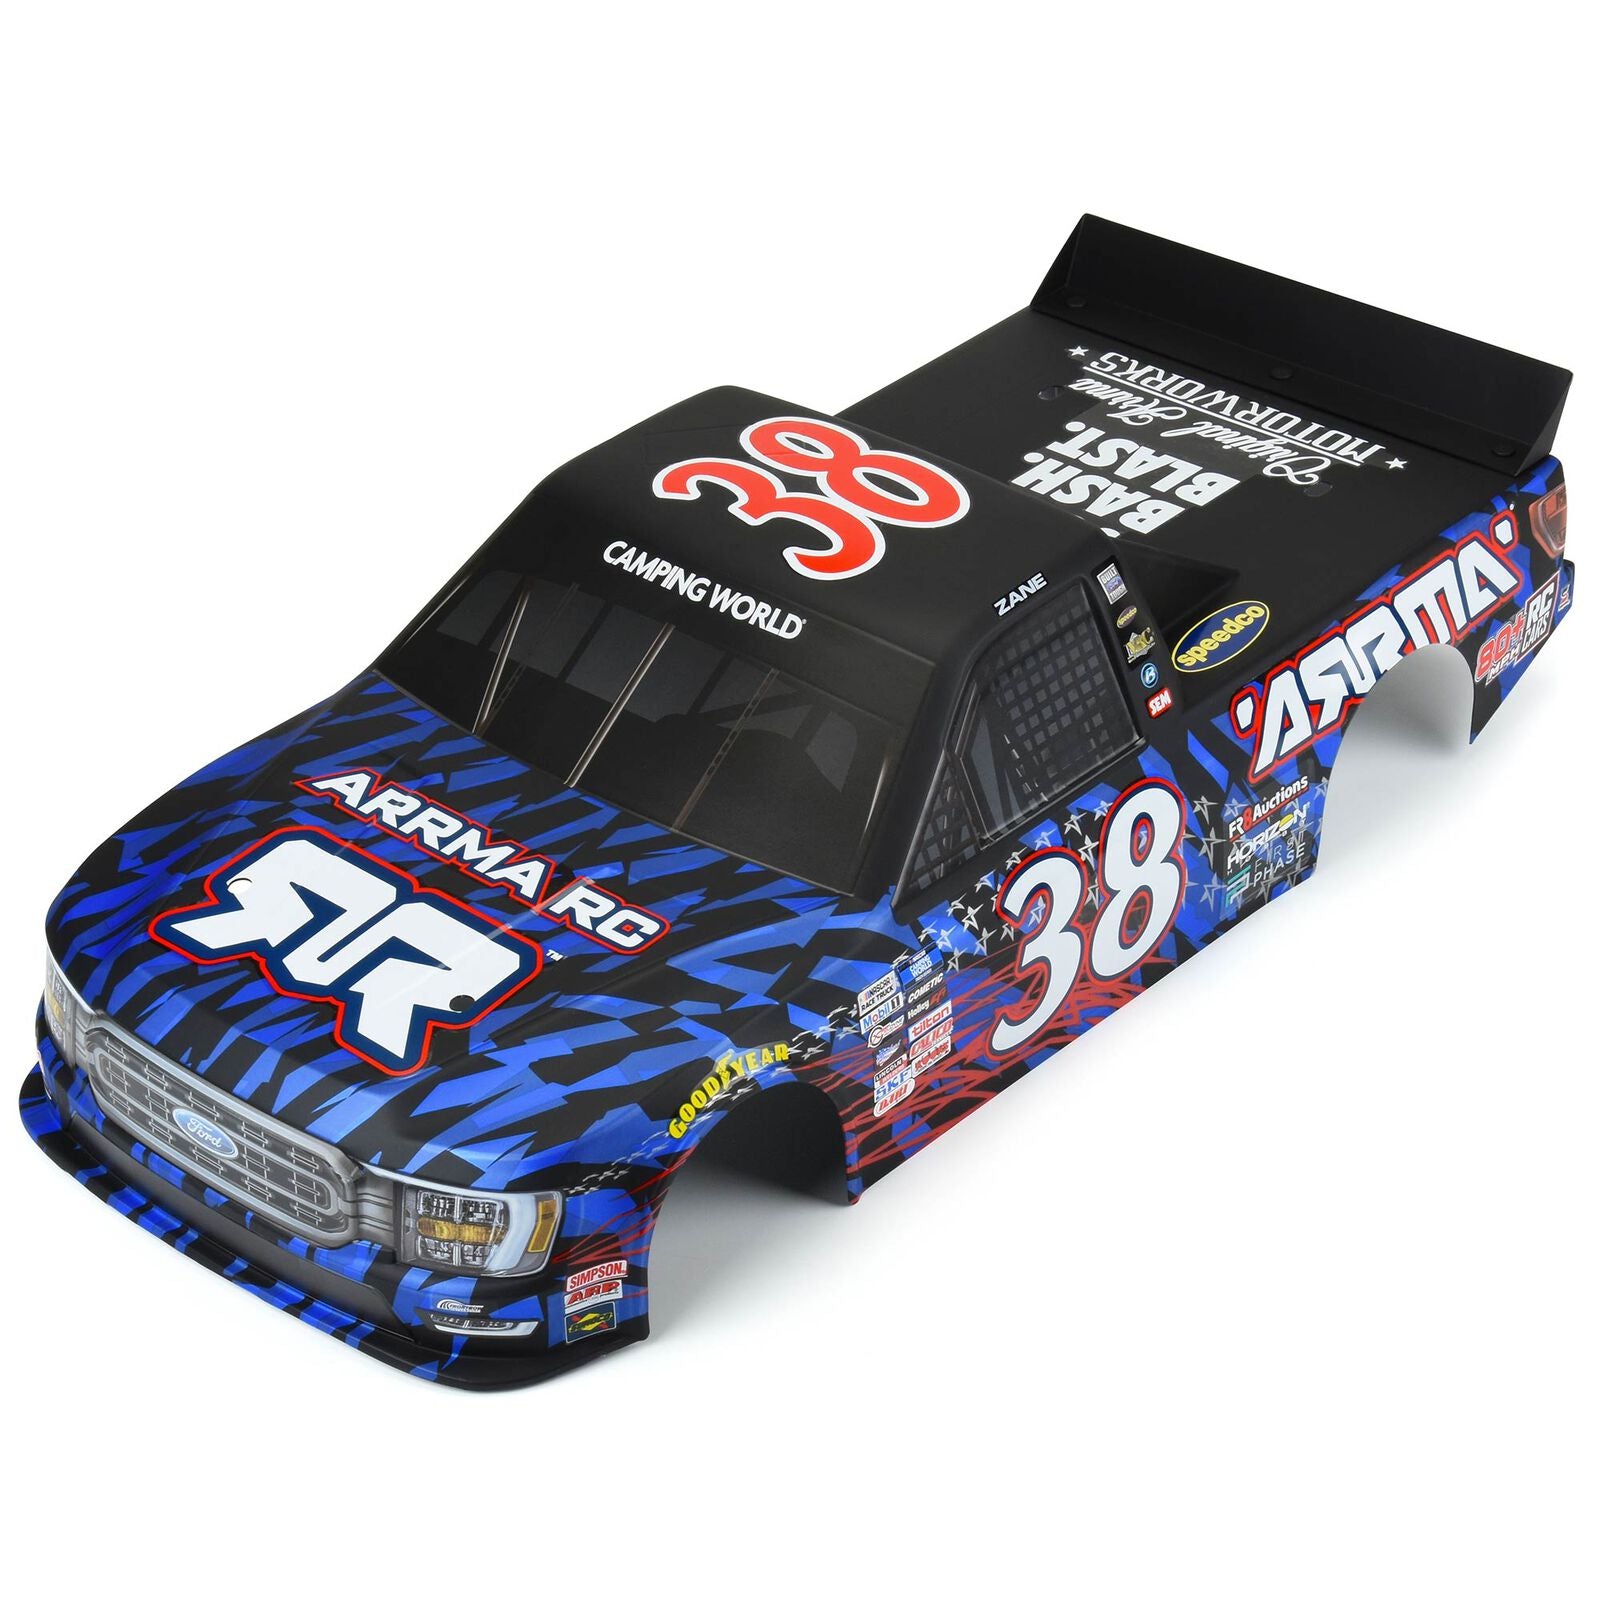 ARRMA ARA410016 No. 38 Ford NASCAR Truck Limited Edition Painted Body Blue/Red: INFRACTION 6S BLX